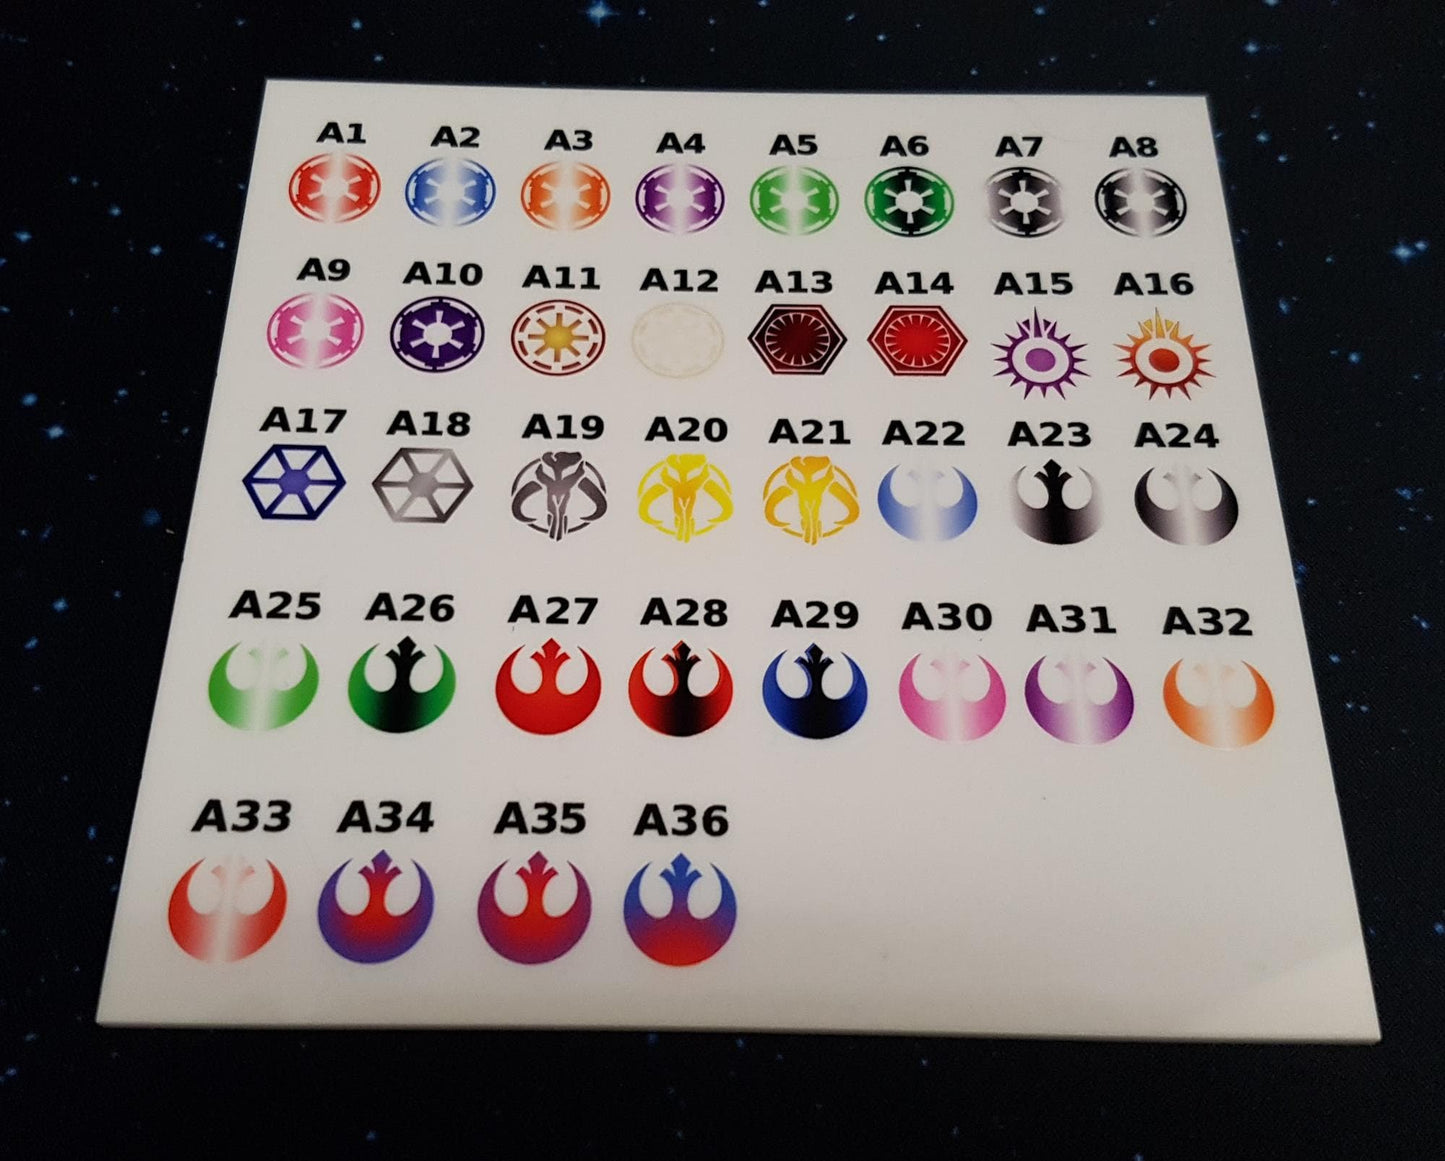 V2 Acrylic Colour Printed Promo Damage Deck Holder (Black Sun) for Star Wars X-Wing